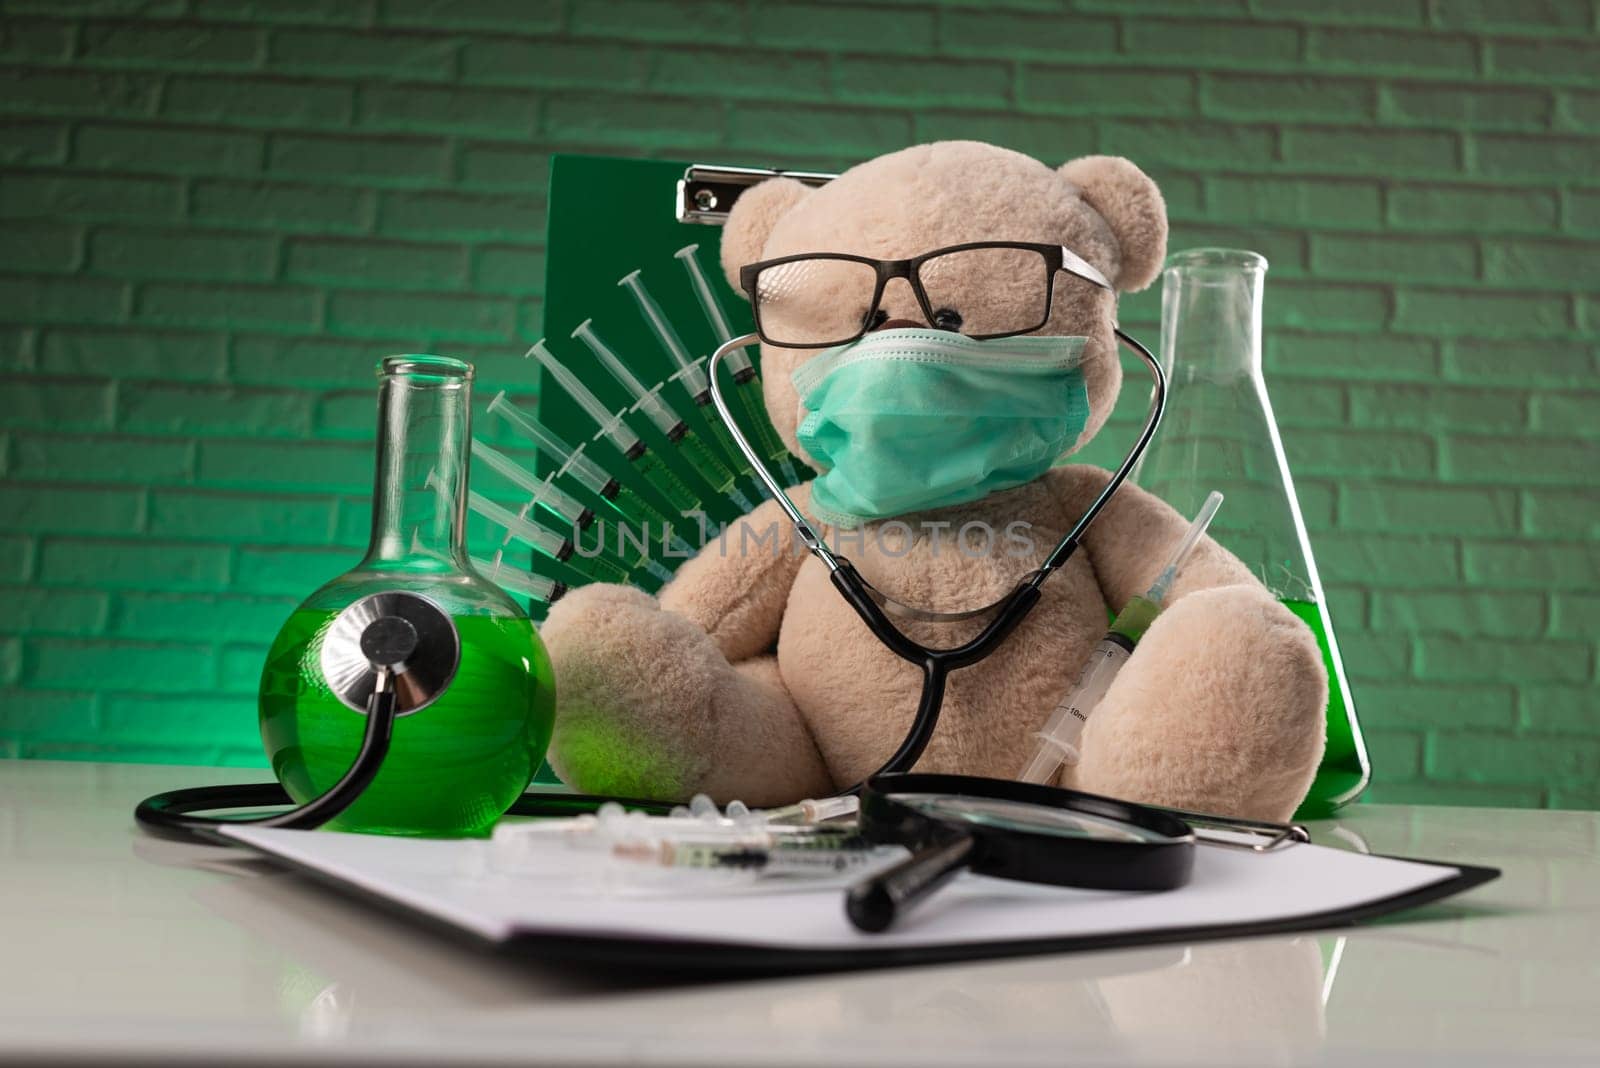 teddy bear in a medical mask with syringes in his shoulder on a white medical table with medical instruments